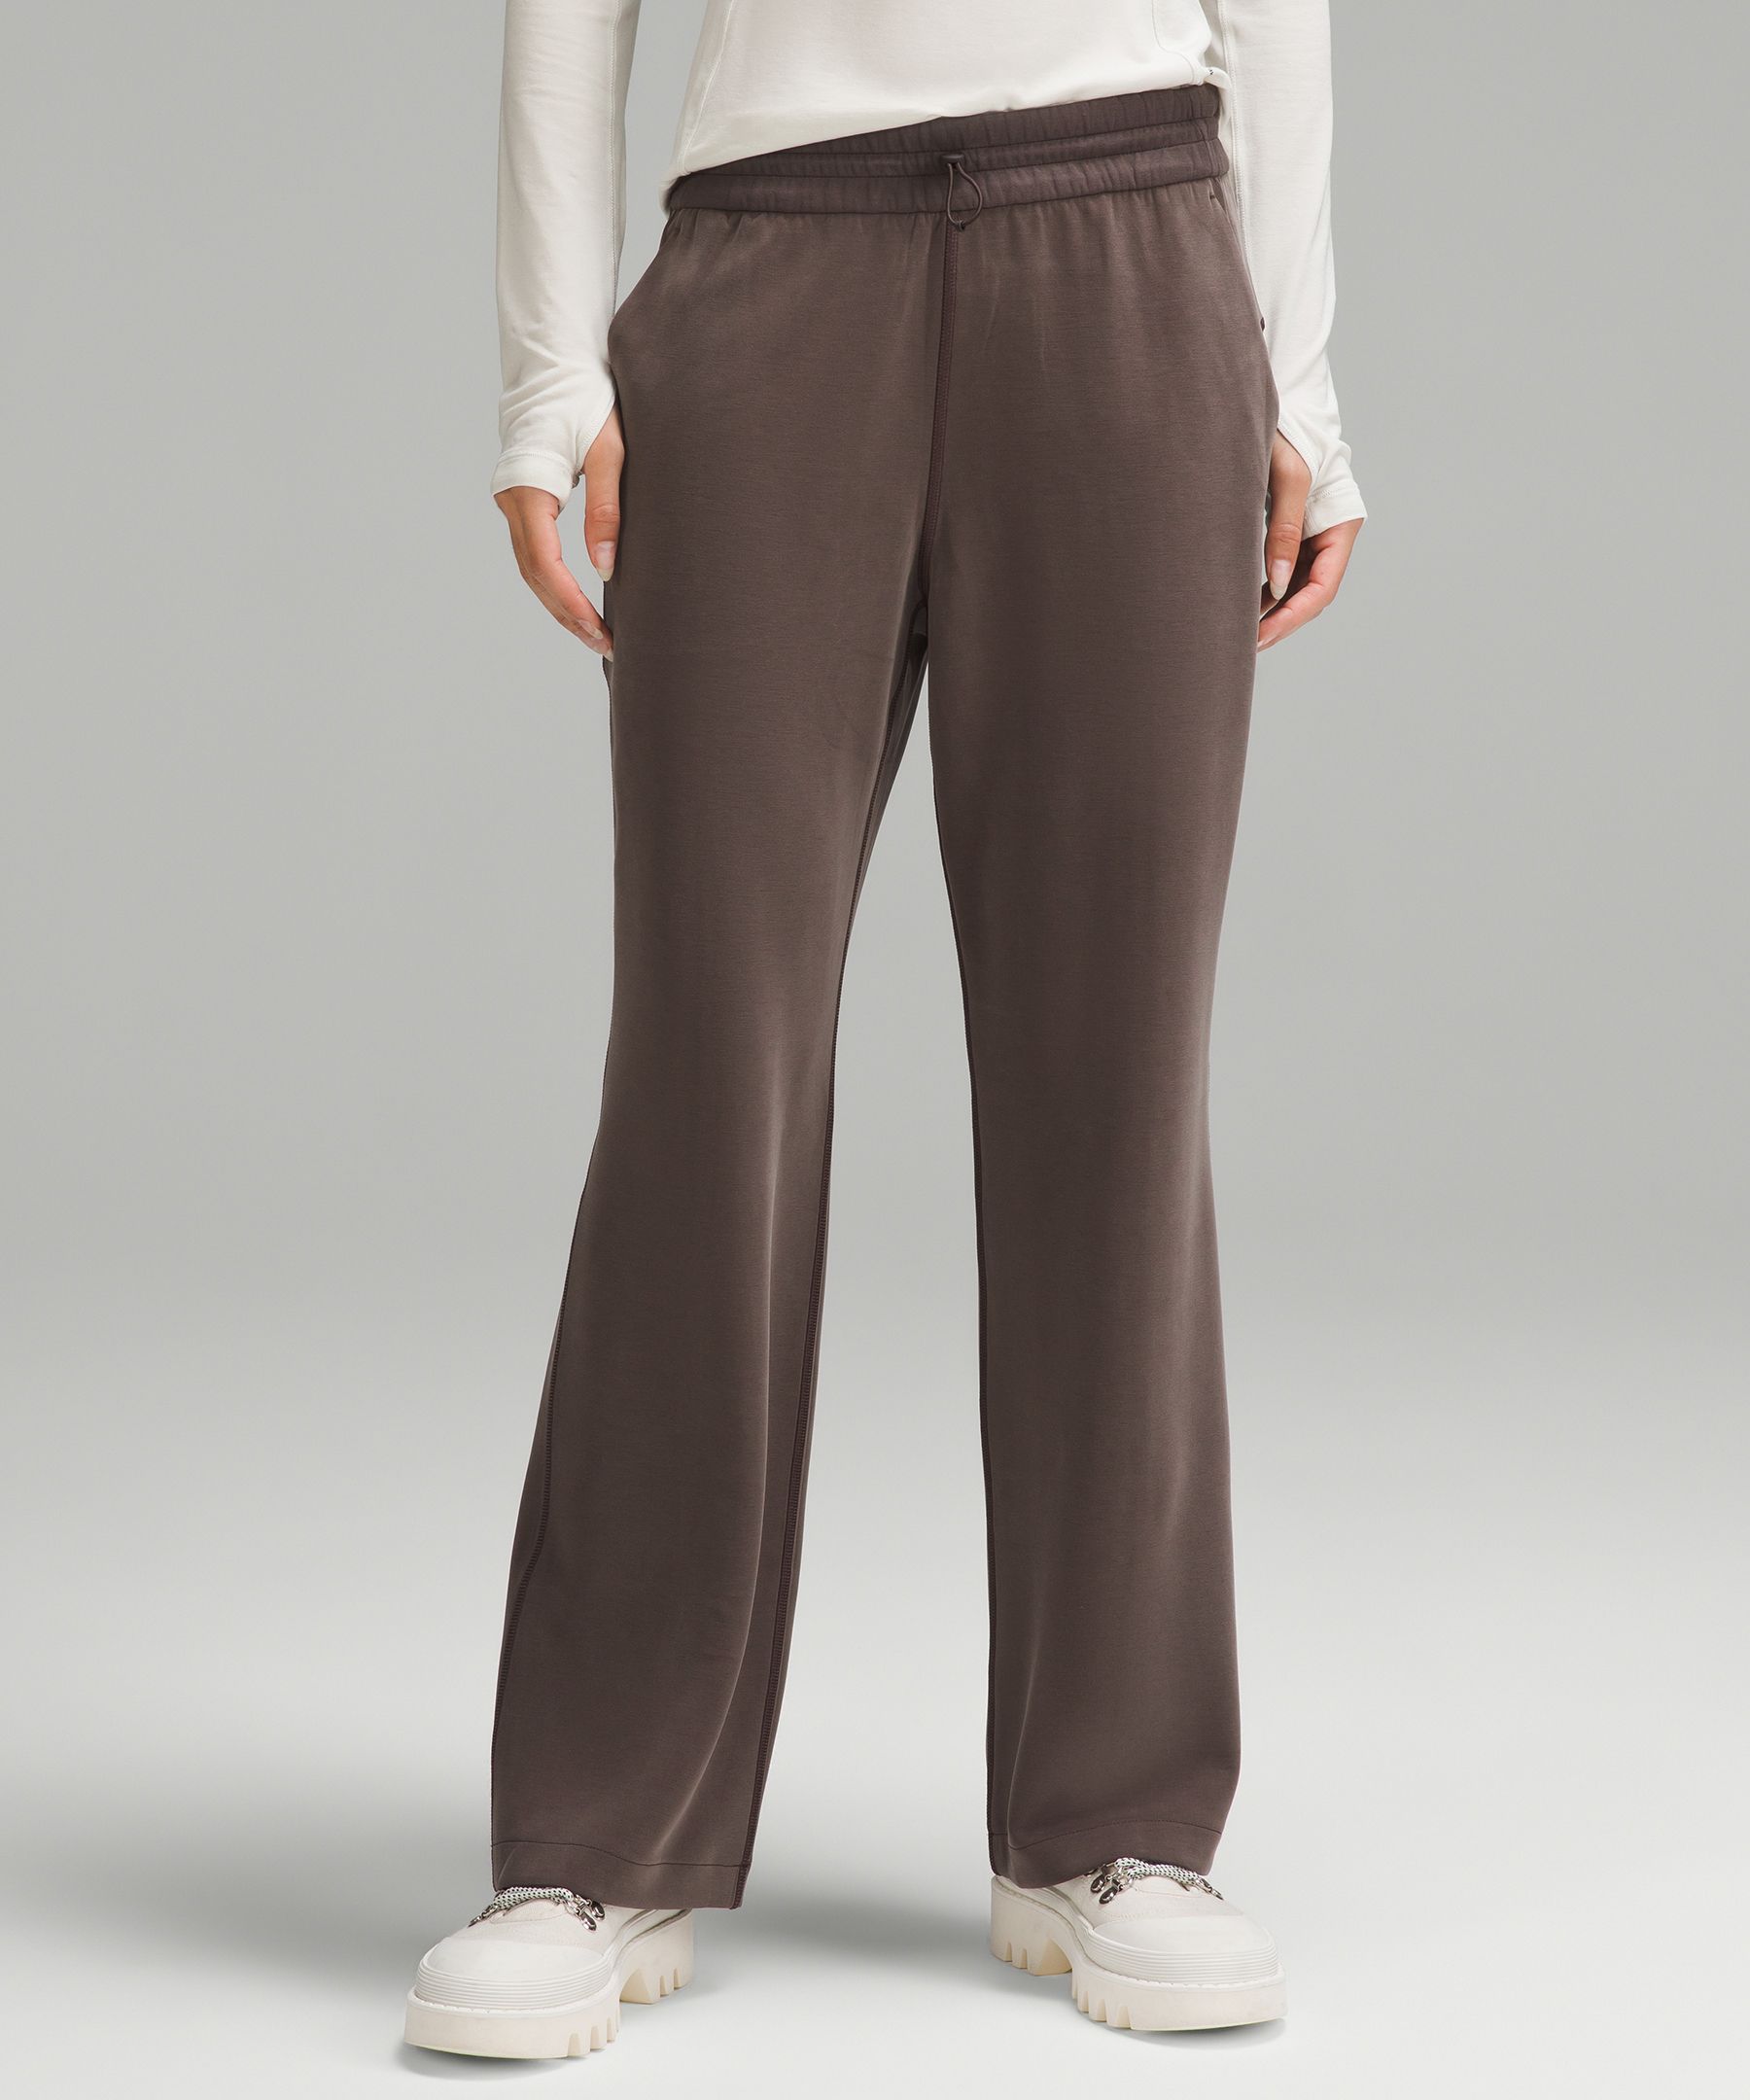 these are the SOFTEST sweats ever & look/feel identical to lulu softst, lululemon softstreme pant